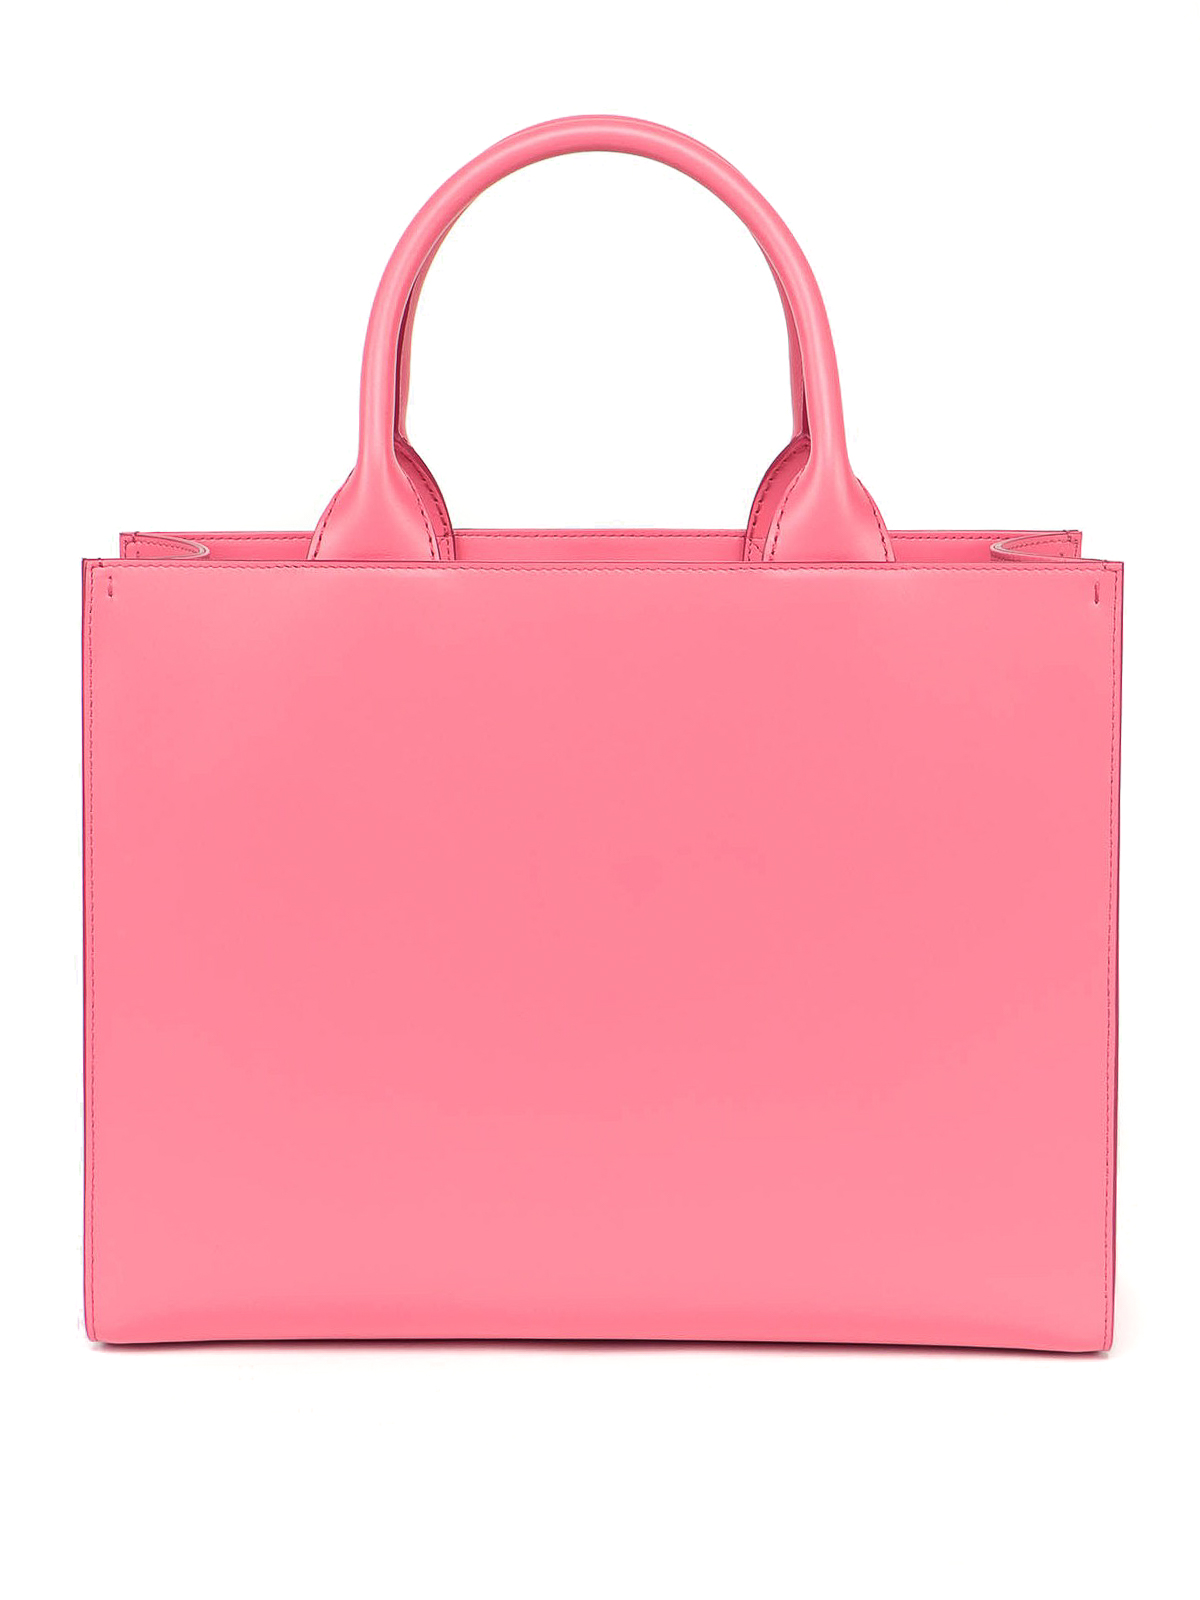 Dolce & Gabbana Pink Small Daily Tote